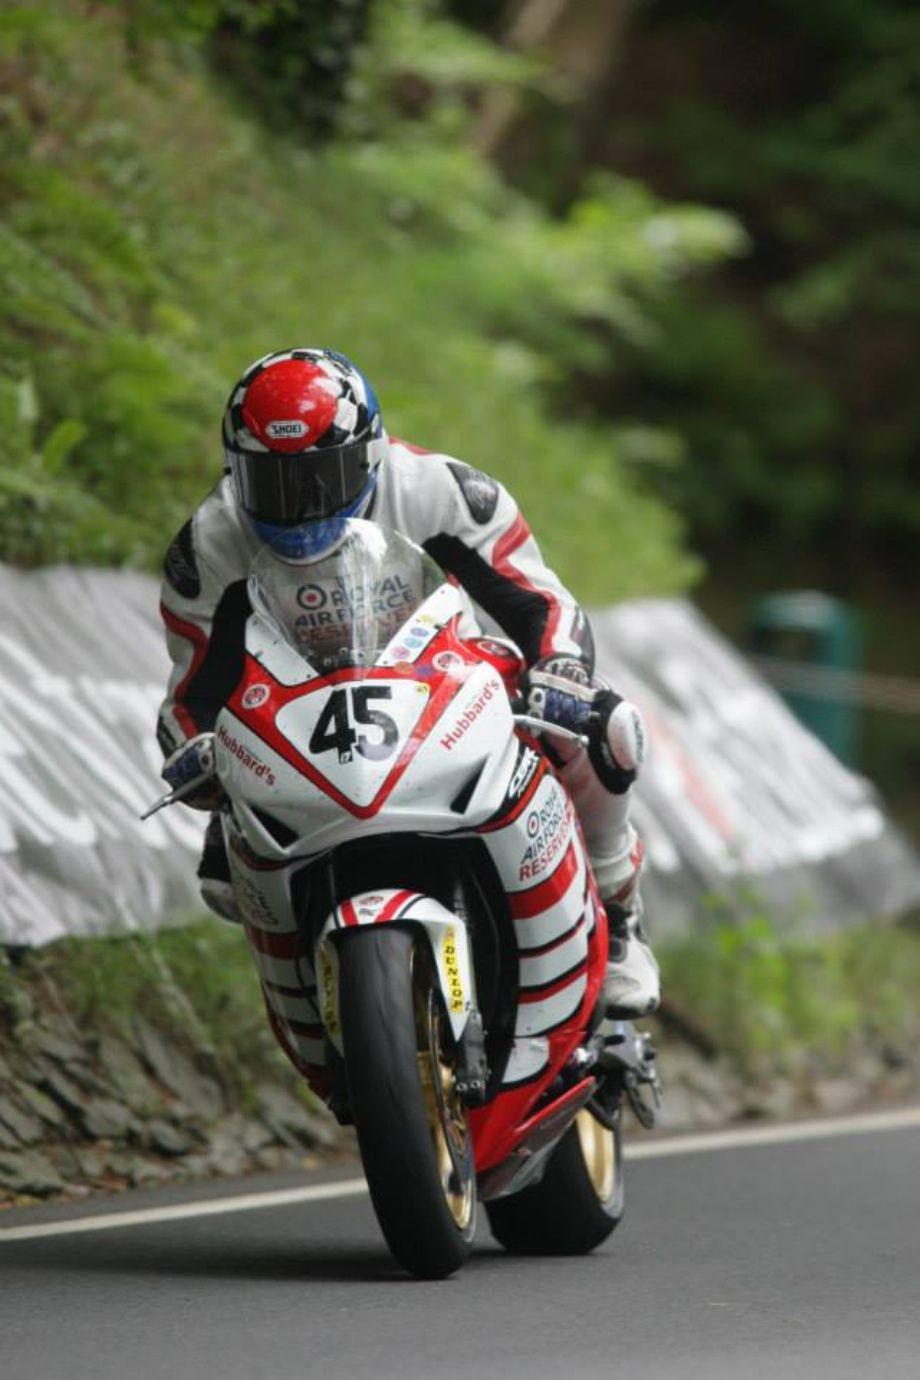 Photos Of Past And Present Isle Of Man TT Motorcycles In High Res